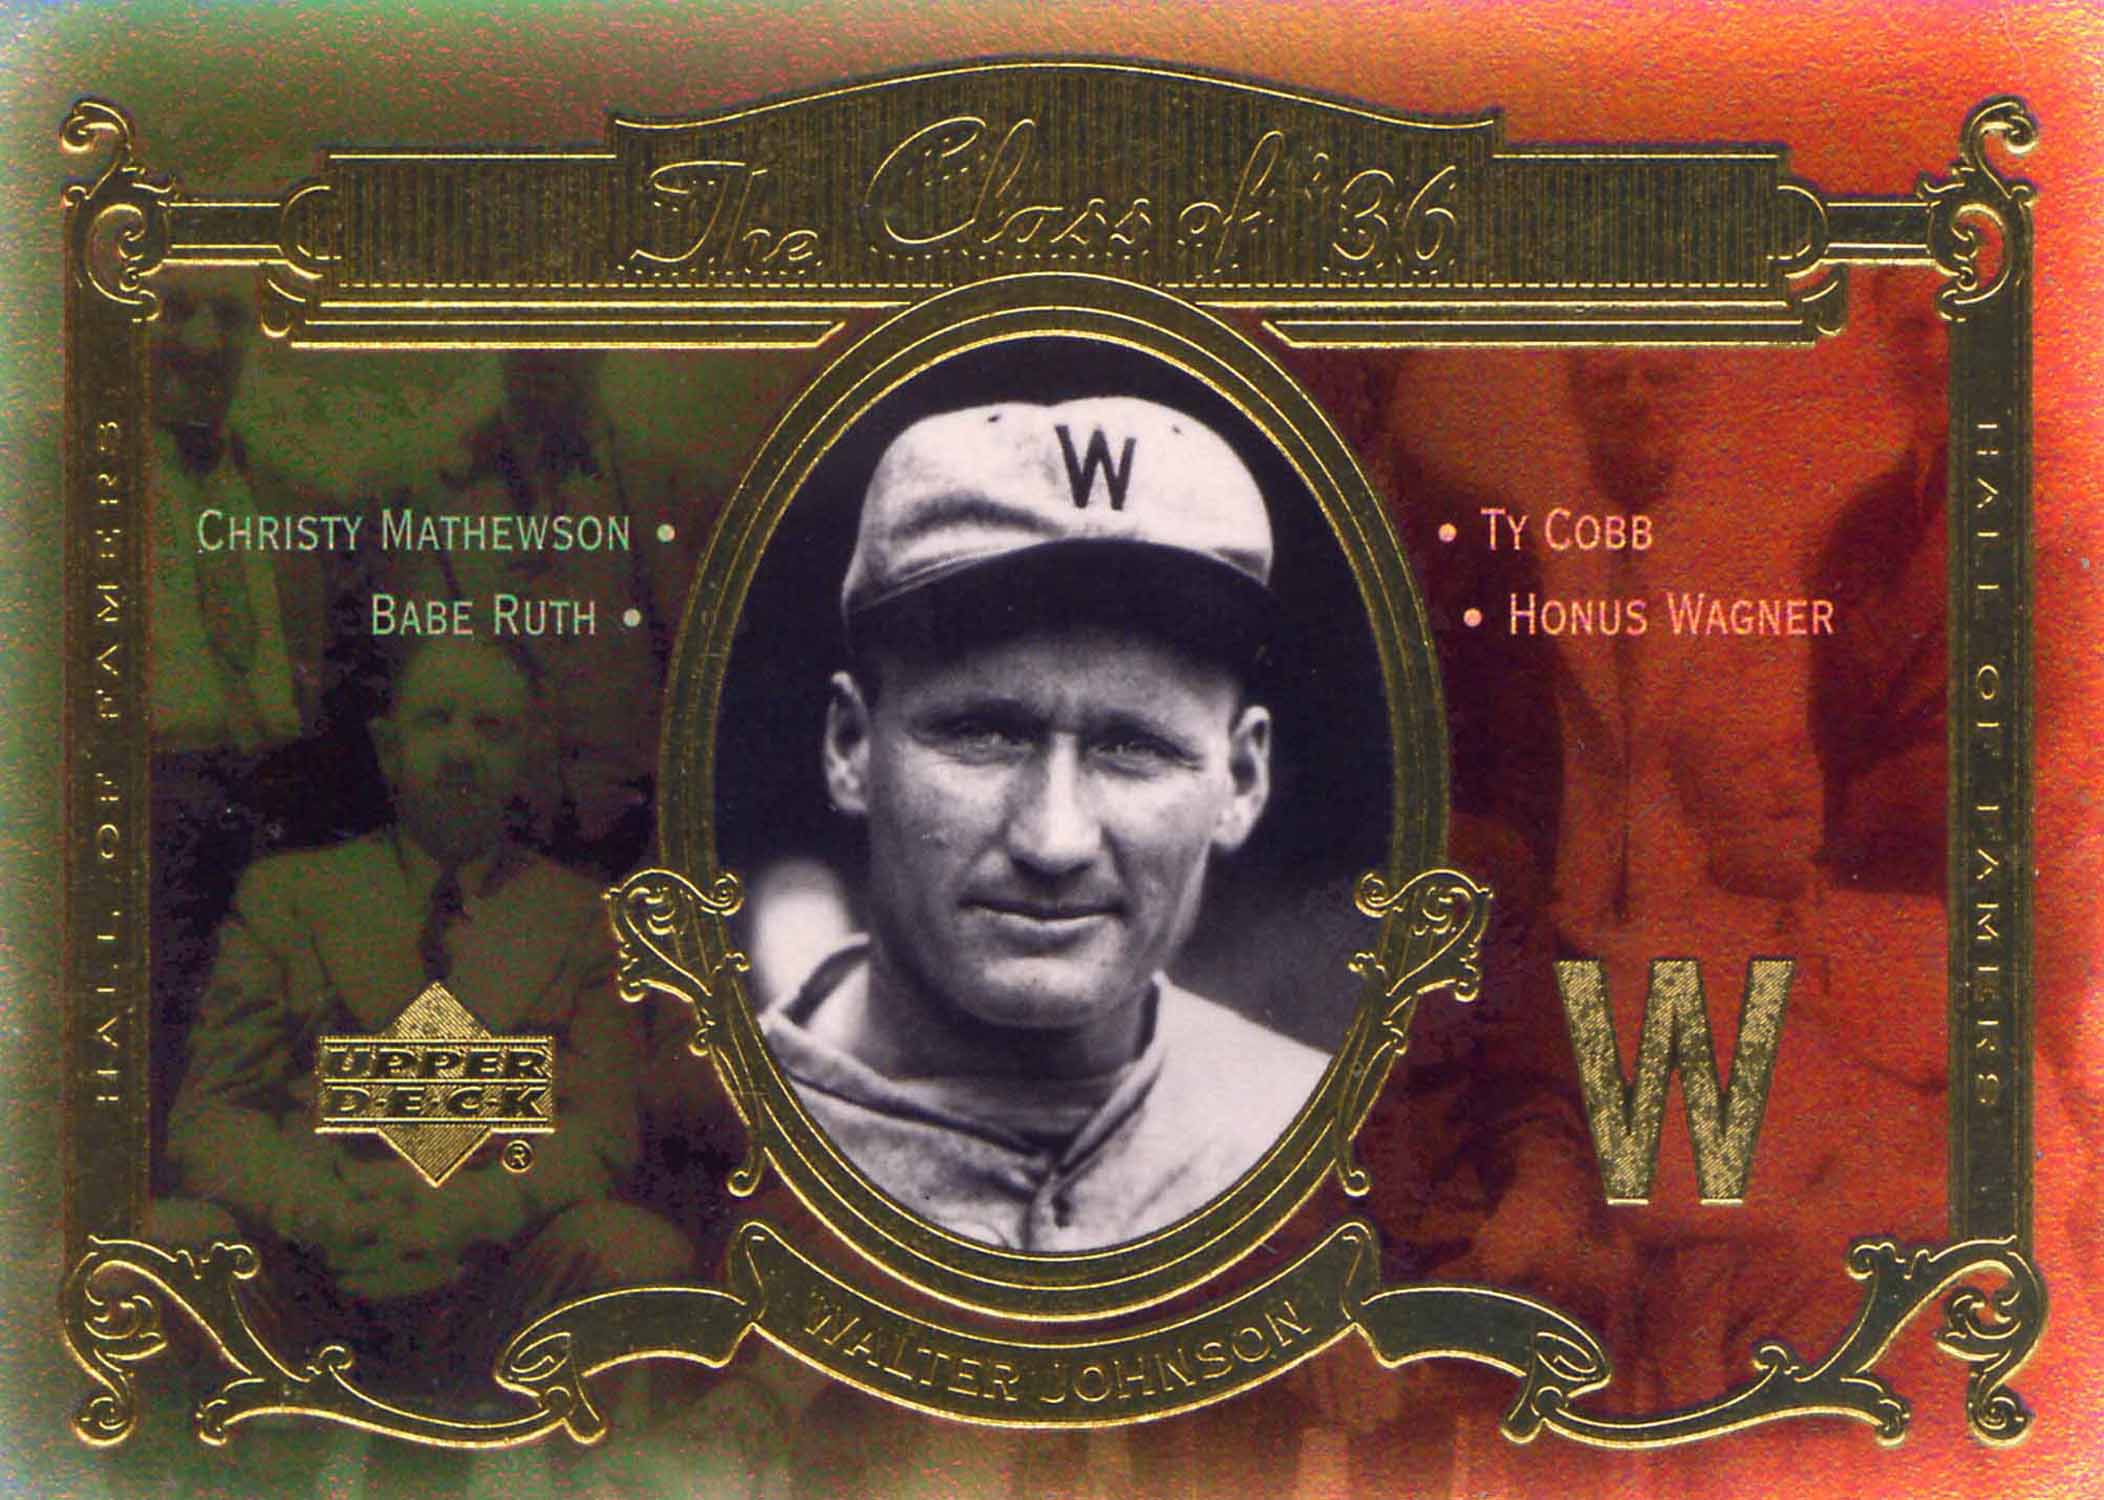 2001 Upper Deck Hall of Famers Class of '36